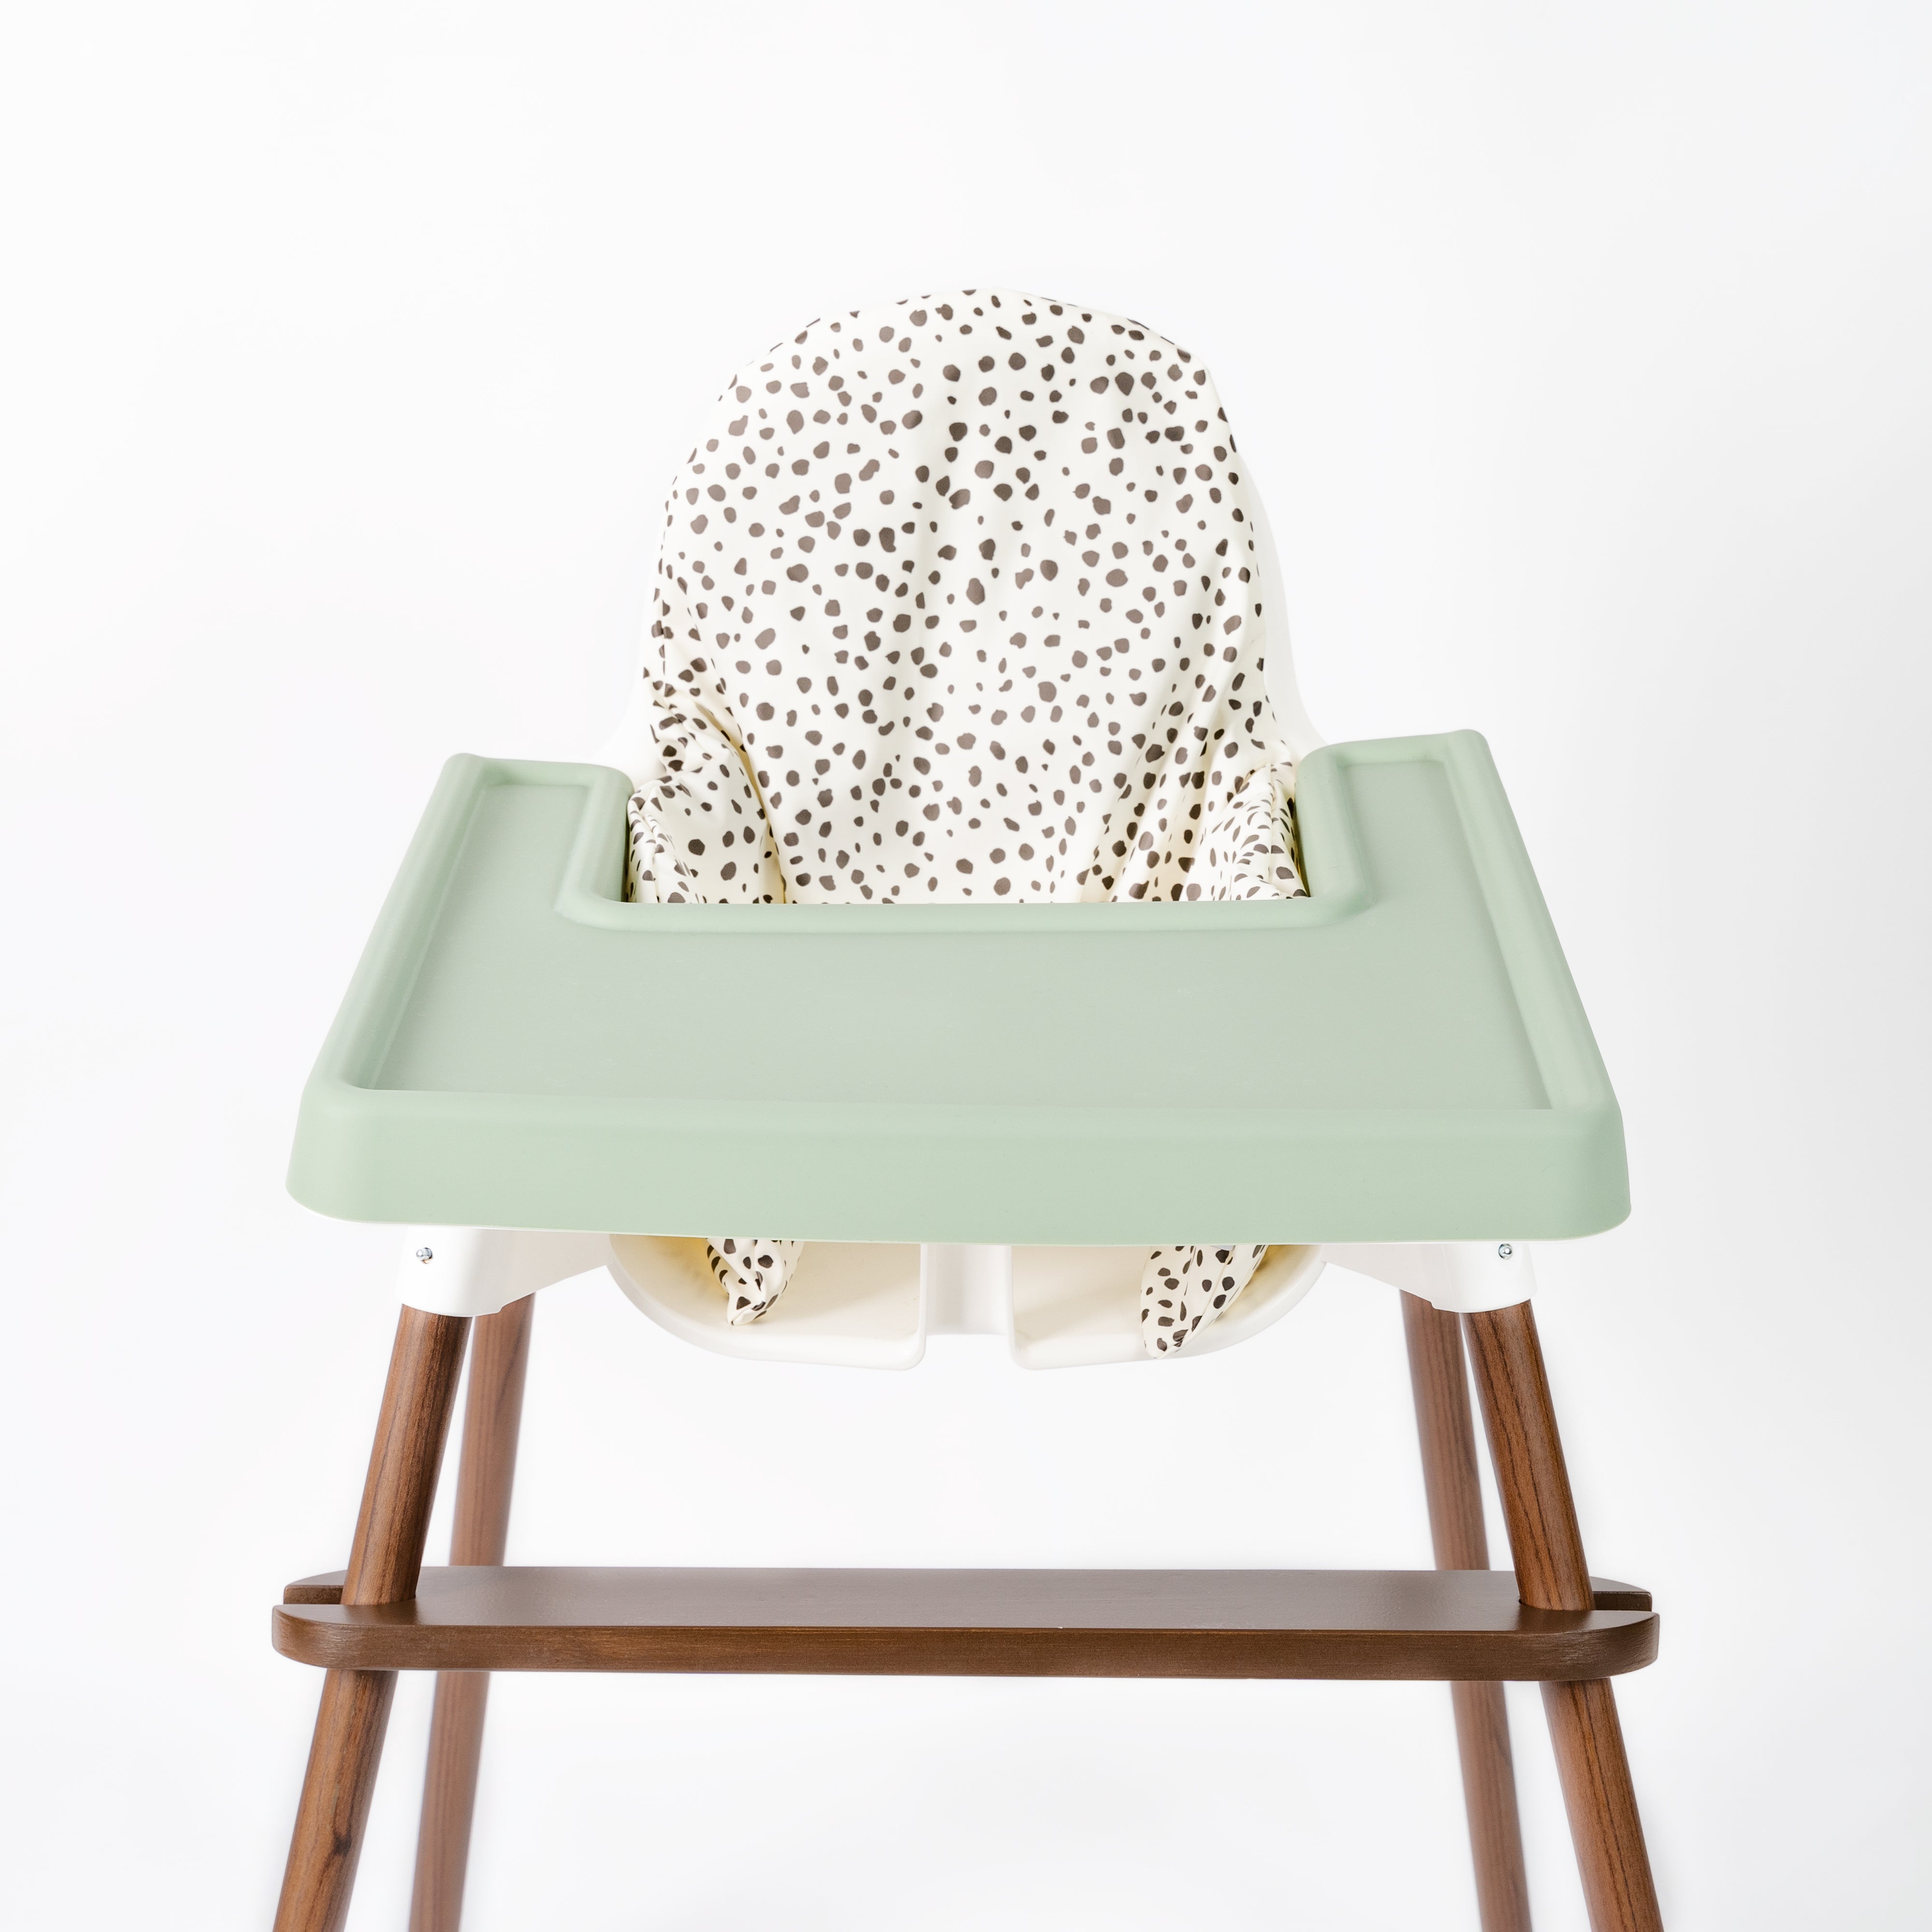 Antilop Highchair Footrest Ready to Ship Adjustable Foot Rest Compatible  With Antilop 